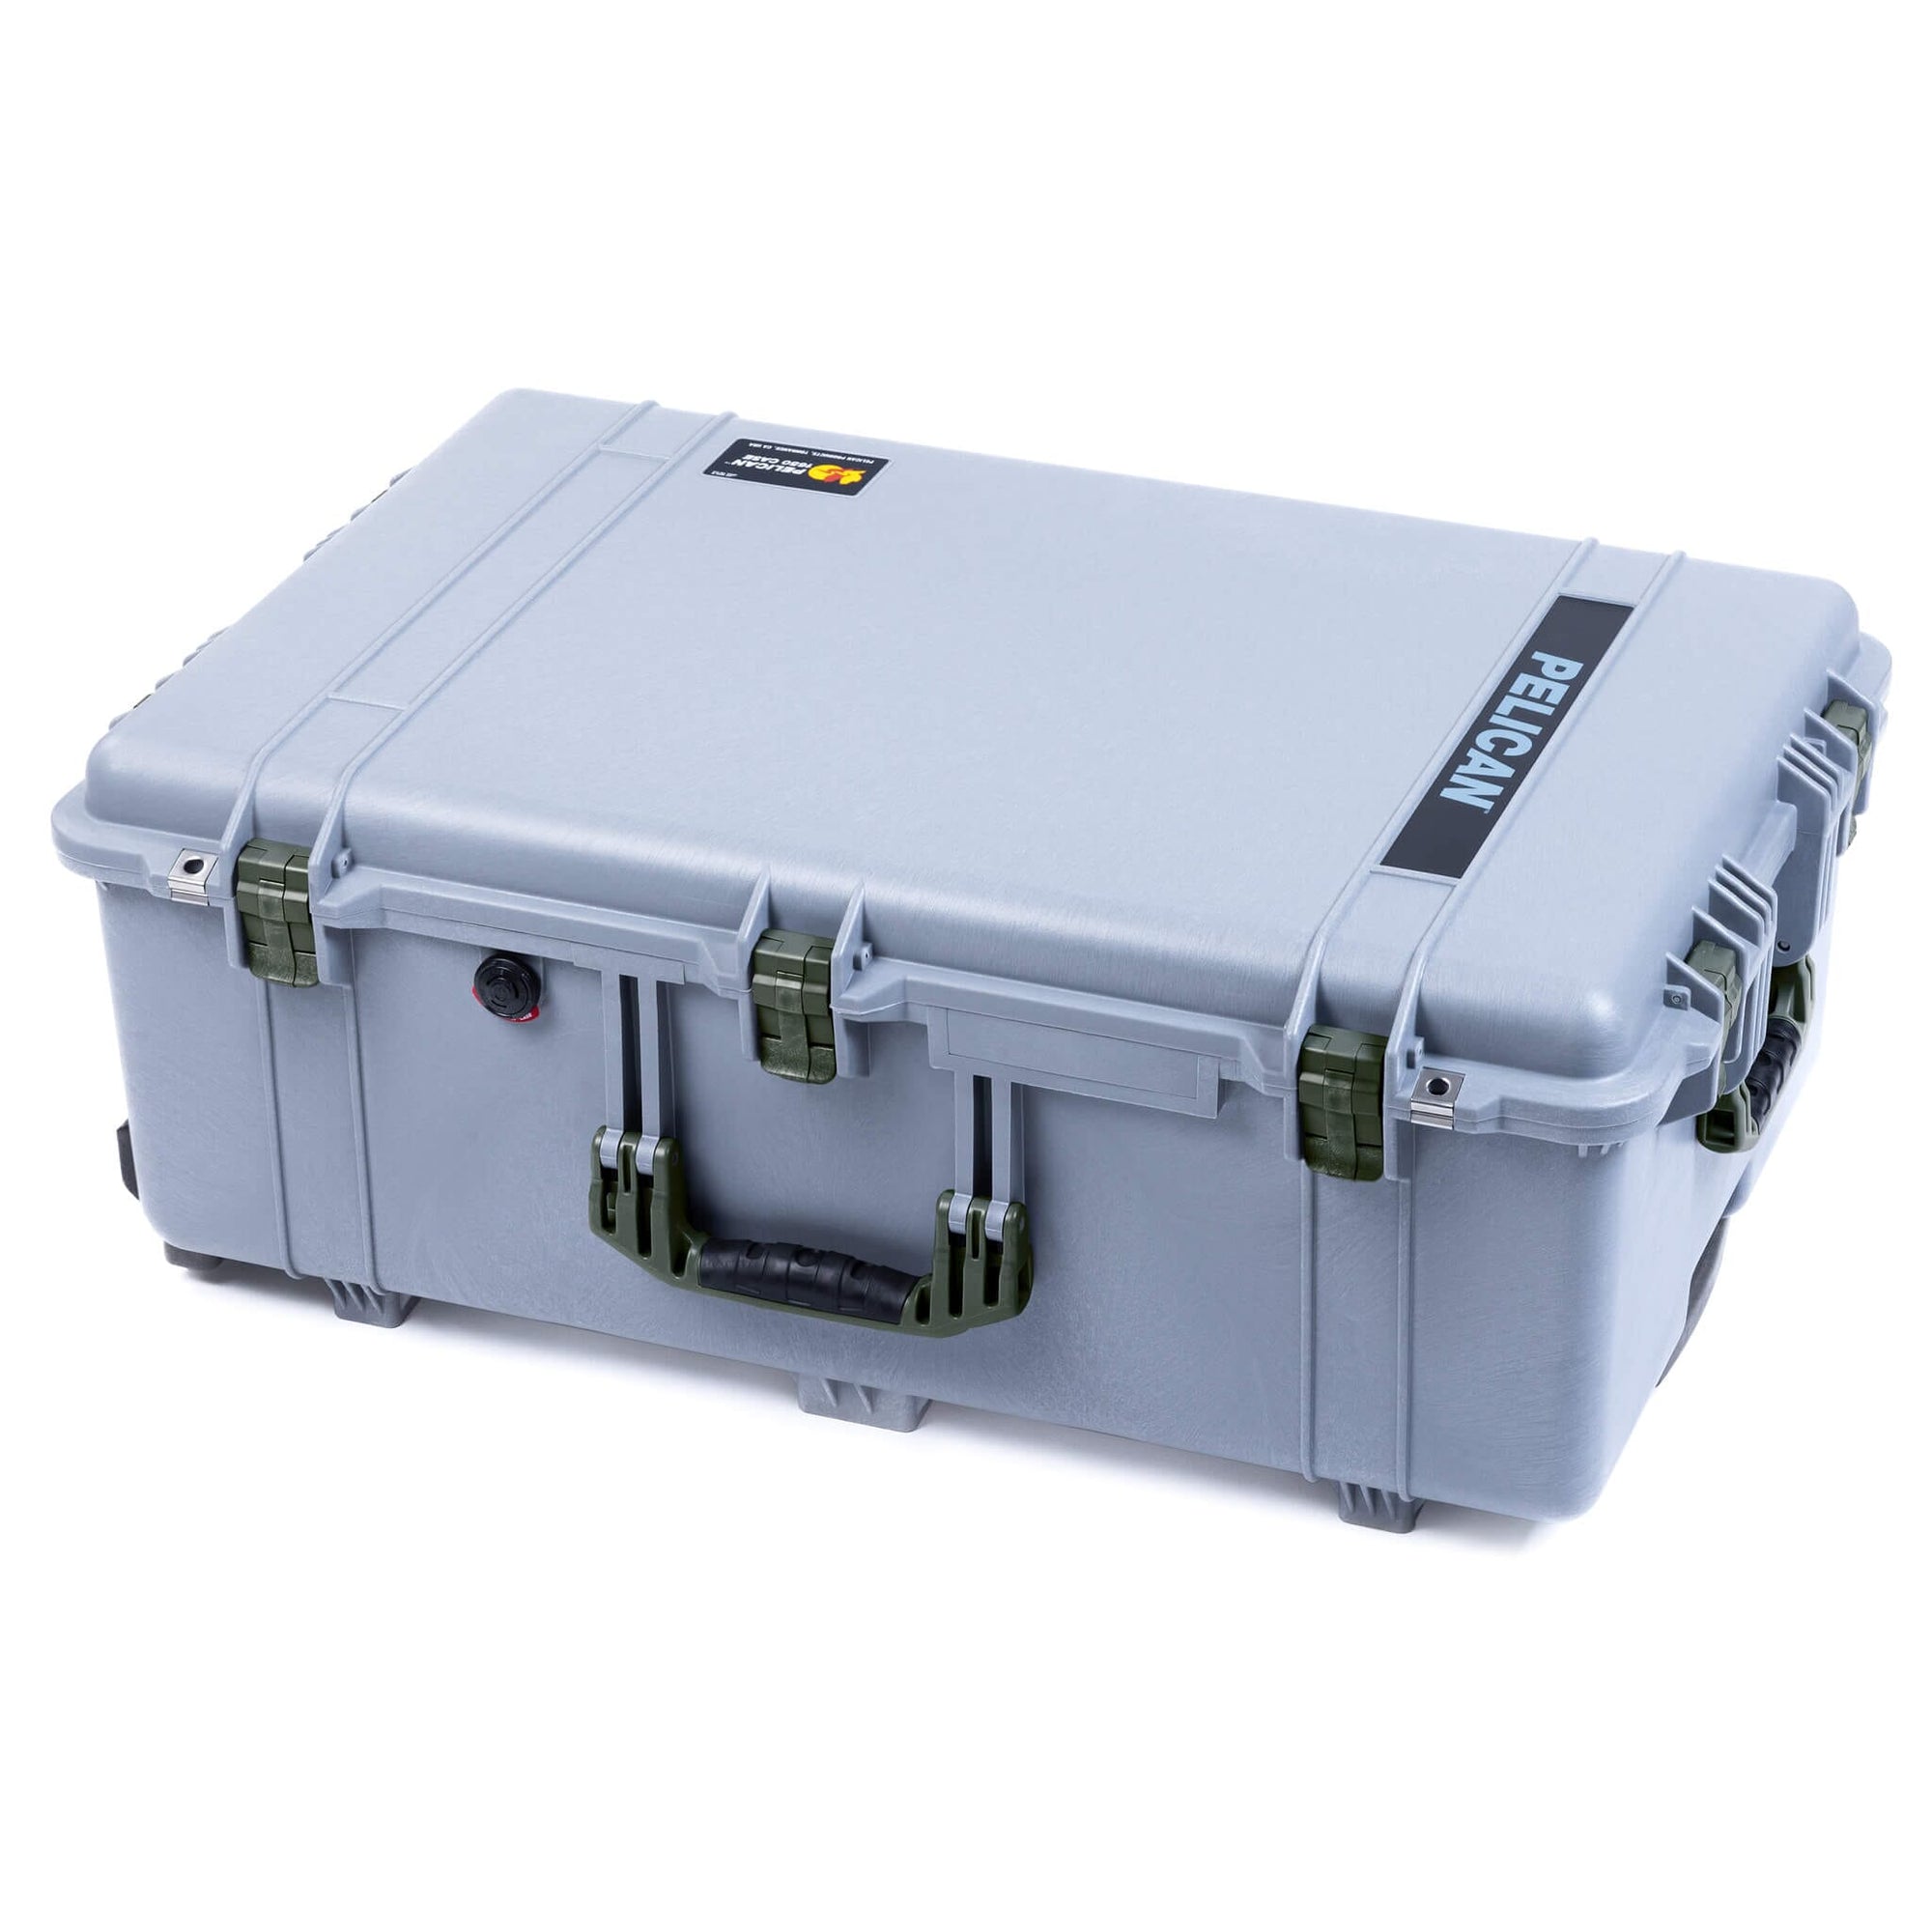 Pelican 1650 Case, Silver with OD Green Handles & Latches ColorCase 